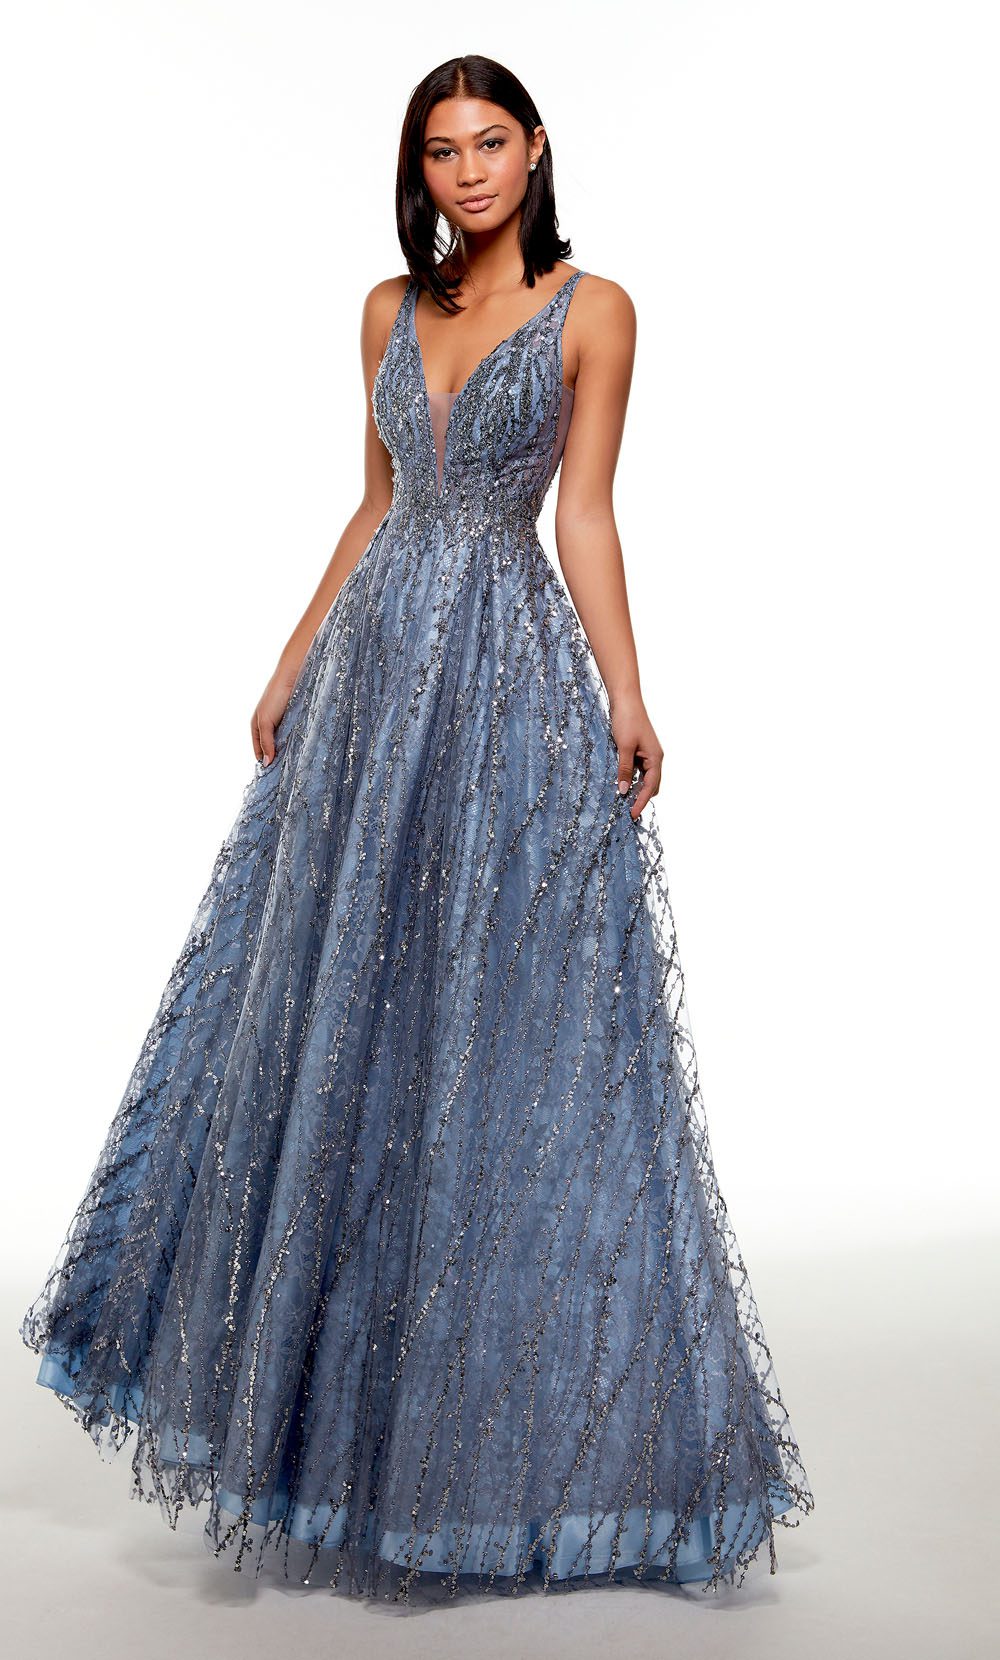 A dark French blue gown